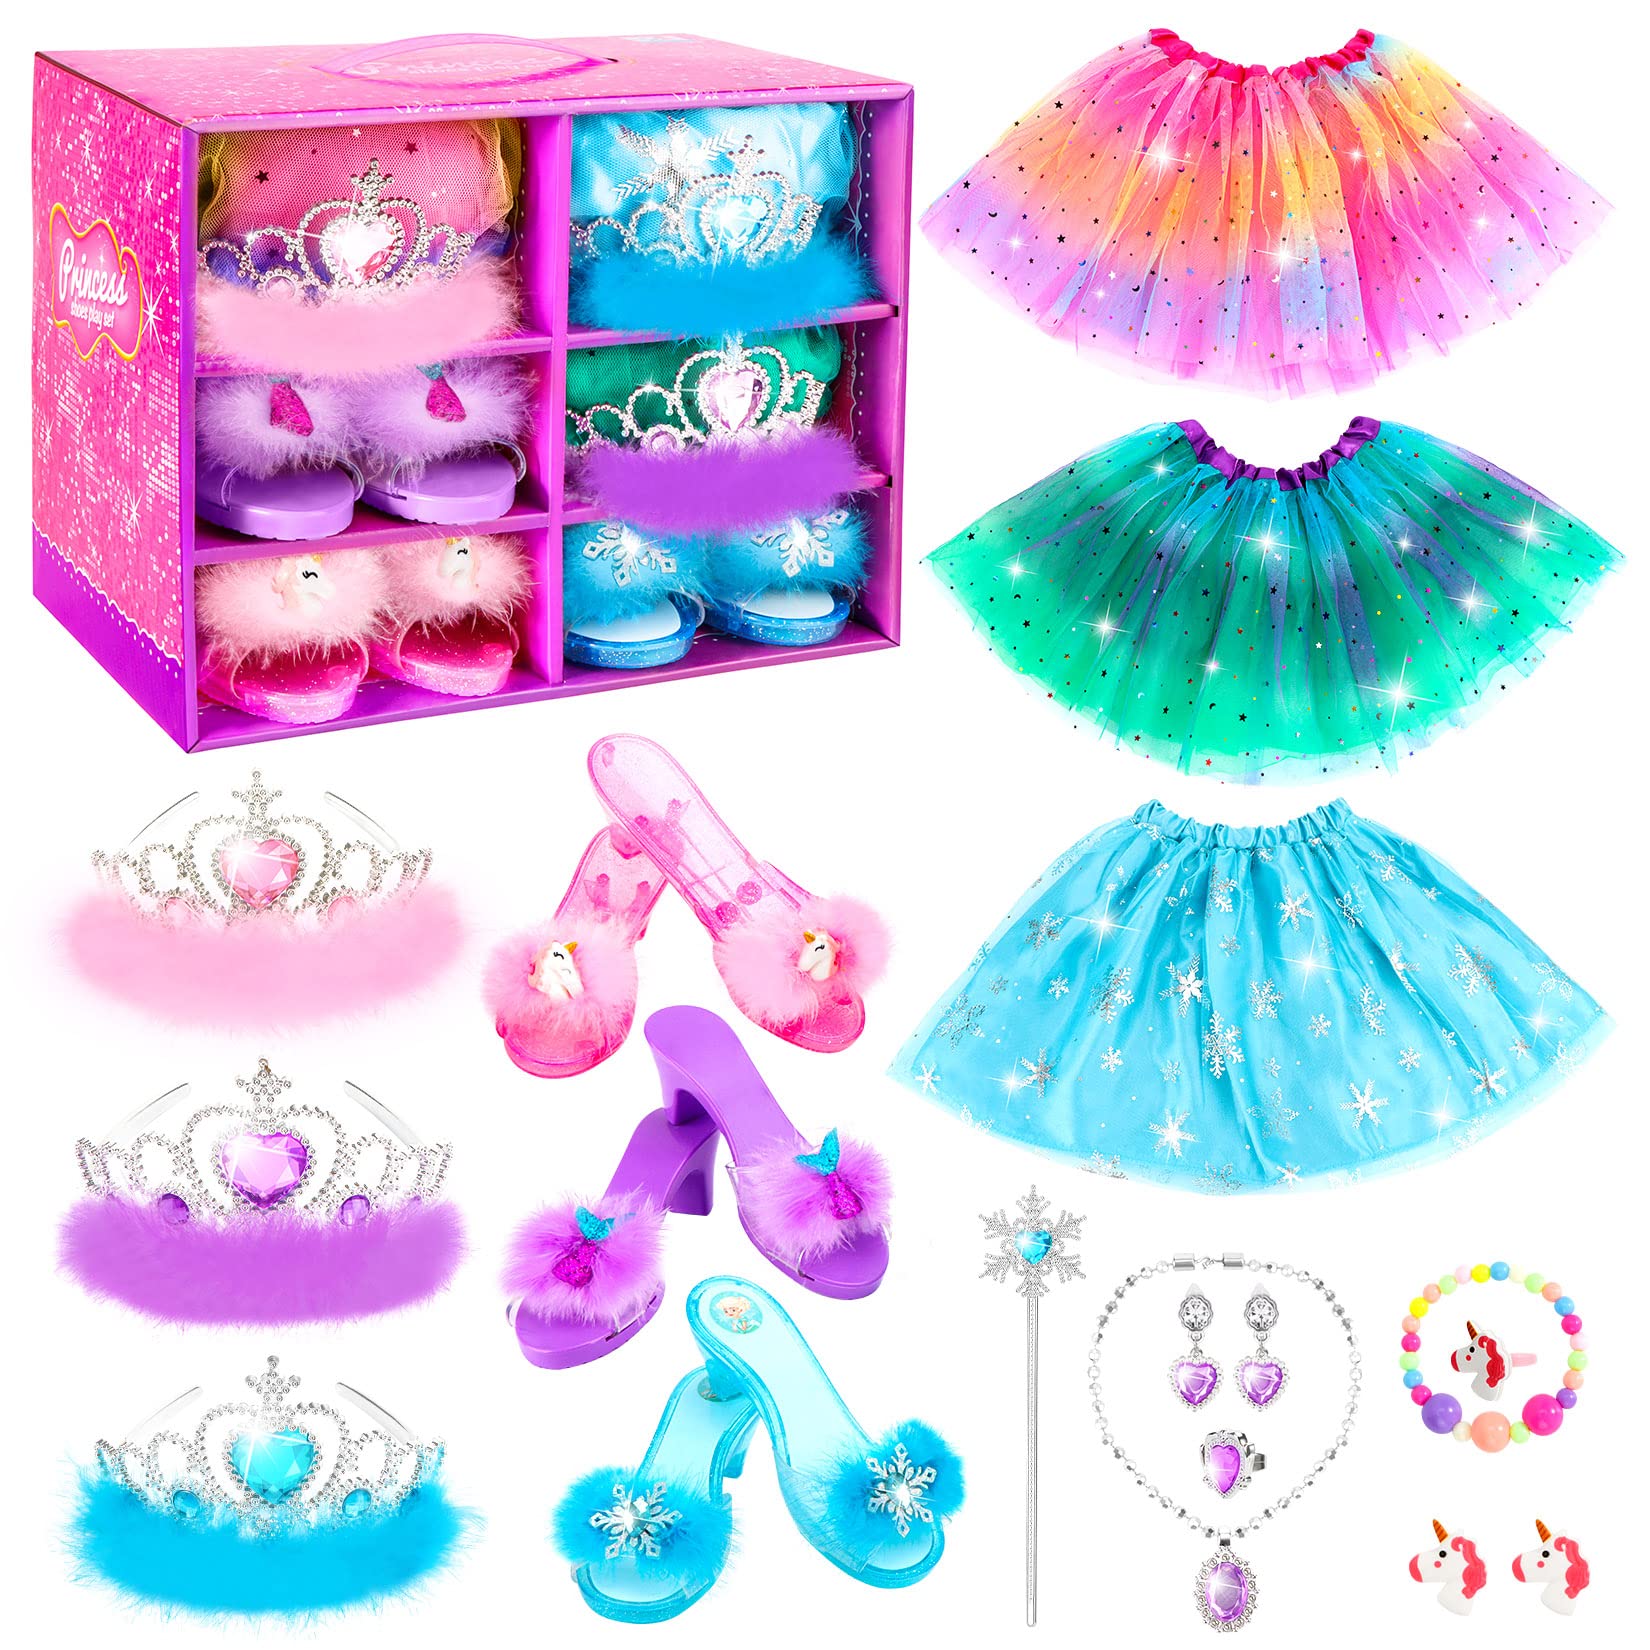 HAMSILY Princess Dress Up Shoes Set for Toddler Jewelry Boutique Kit, 3 Themes of Unicorn Mermaid Ice Princess Costumes Set, Pre